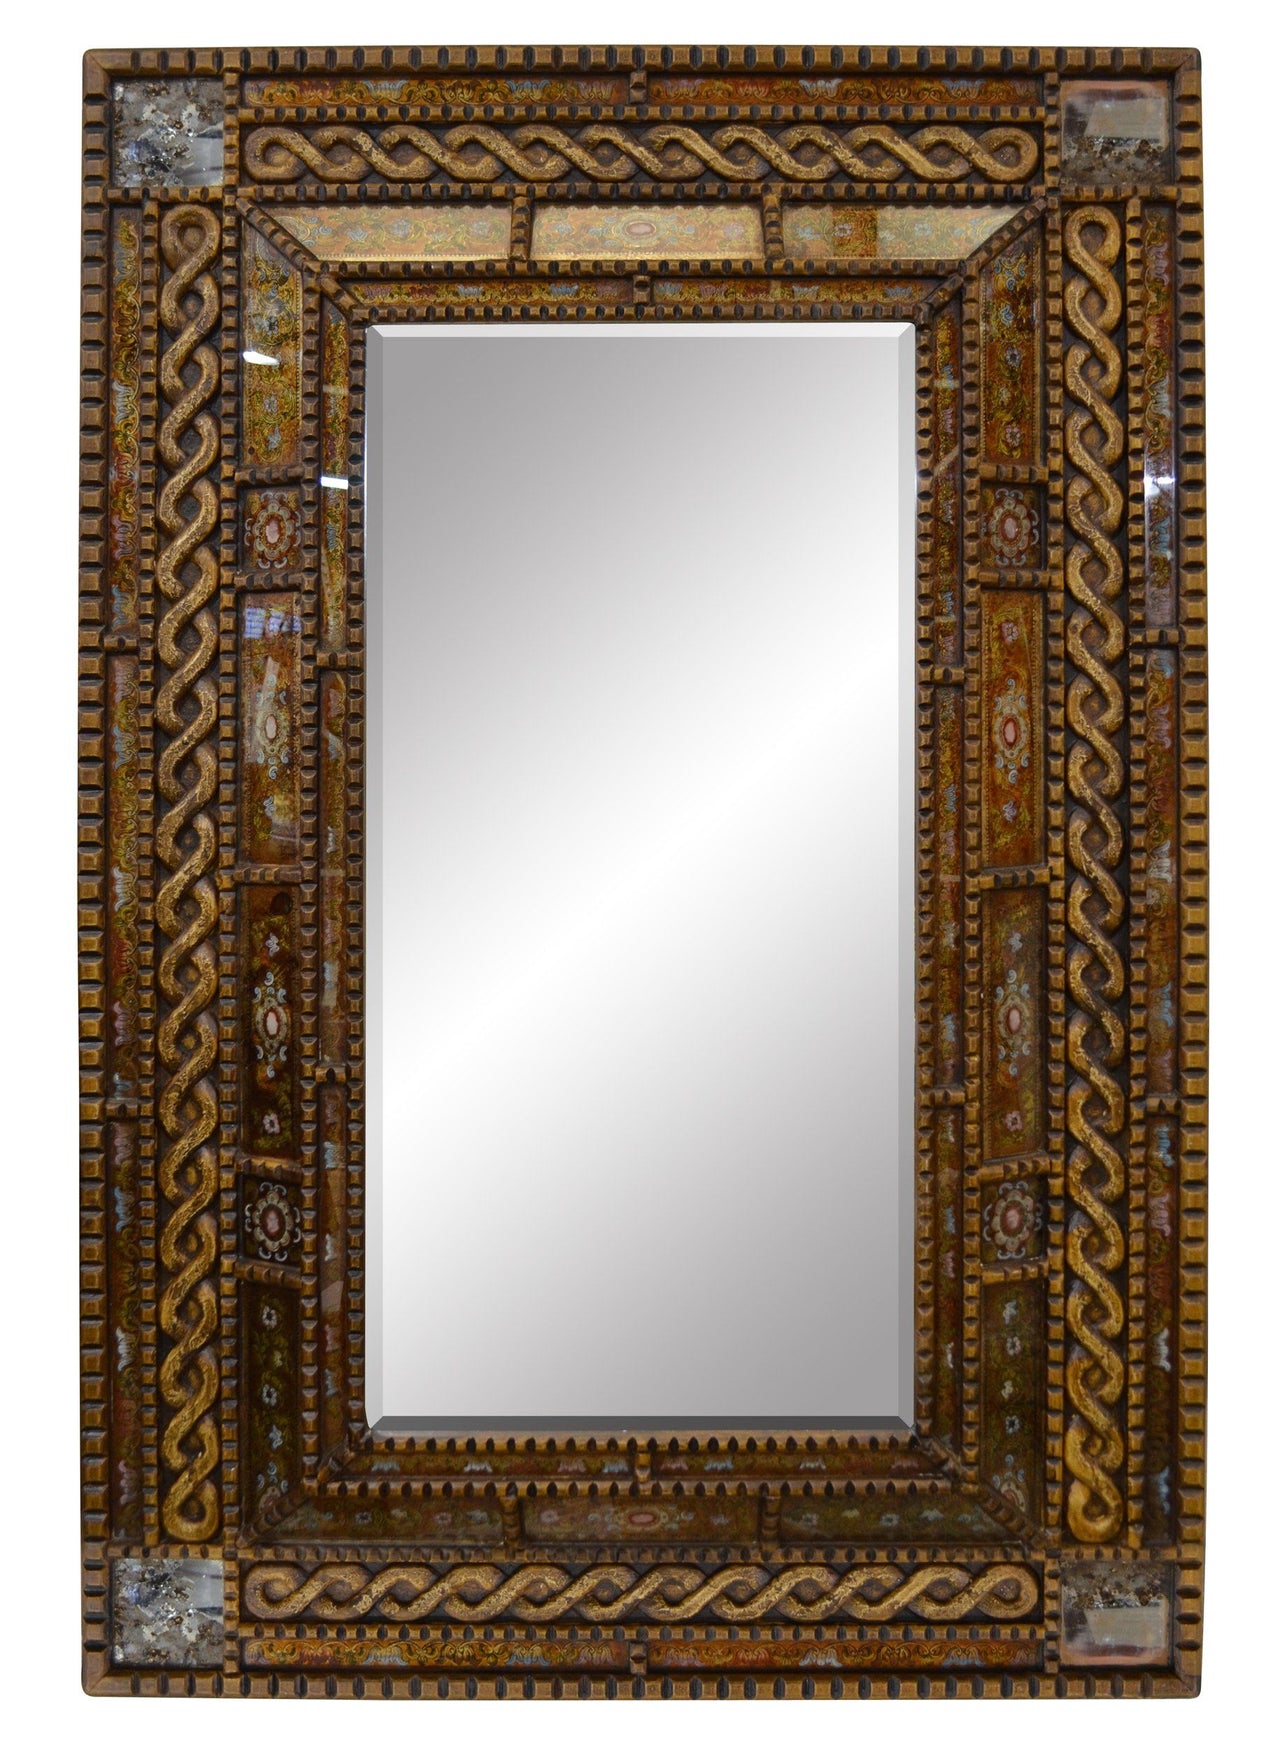 AFD Peruvian Painted Glass Serpentine Mirror Mirrors AFD Multi-Colored 